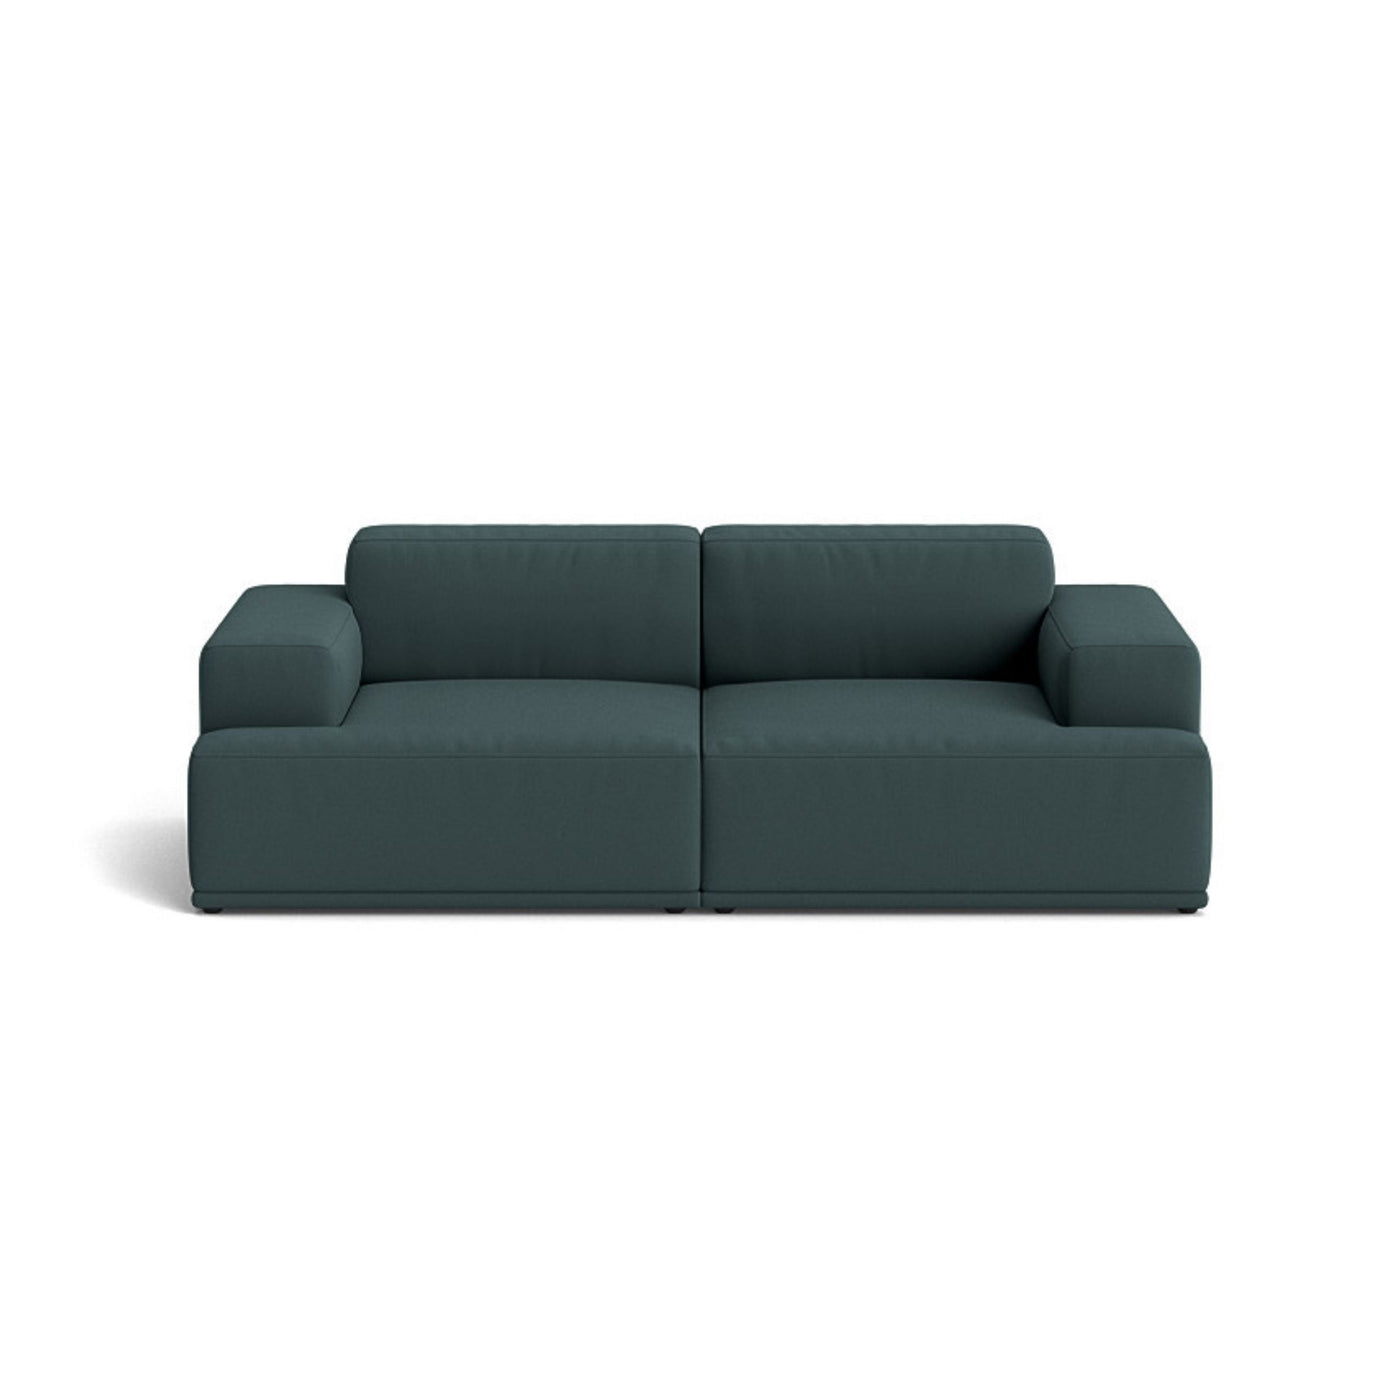 Muuto Connect Soft Modular 2 Seater Sofa, configuration 1. made-to-order from someday designs. #colour_steelcut-180